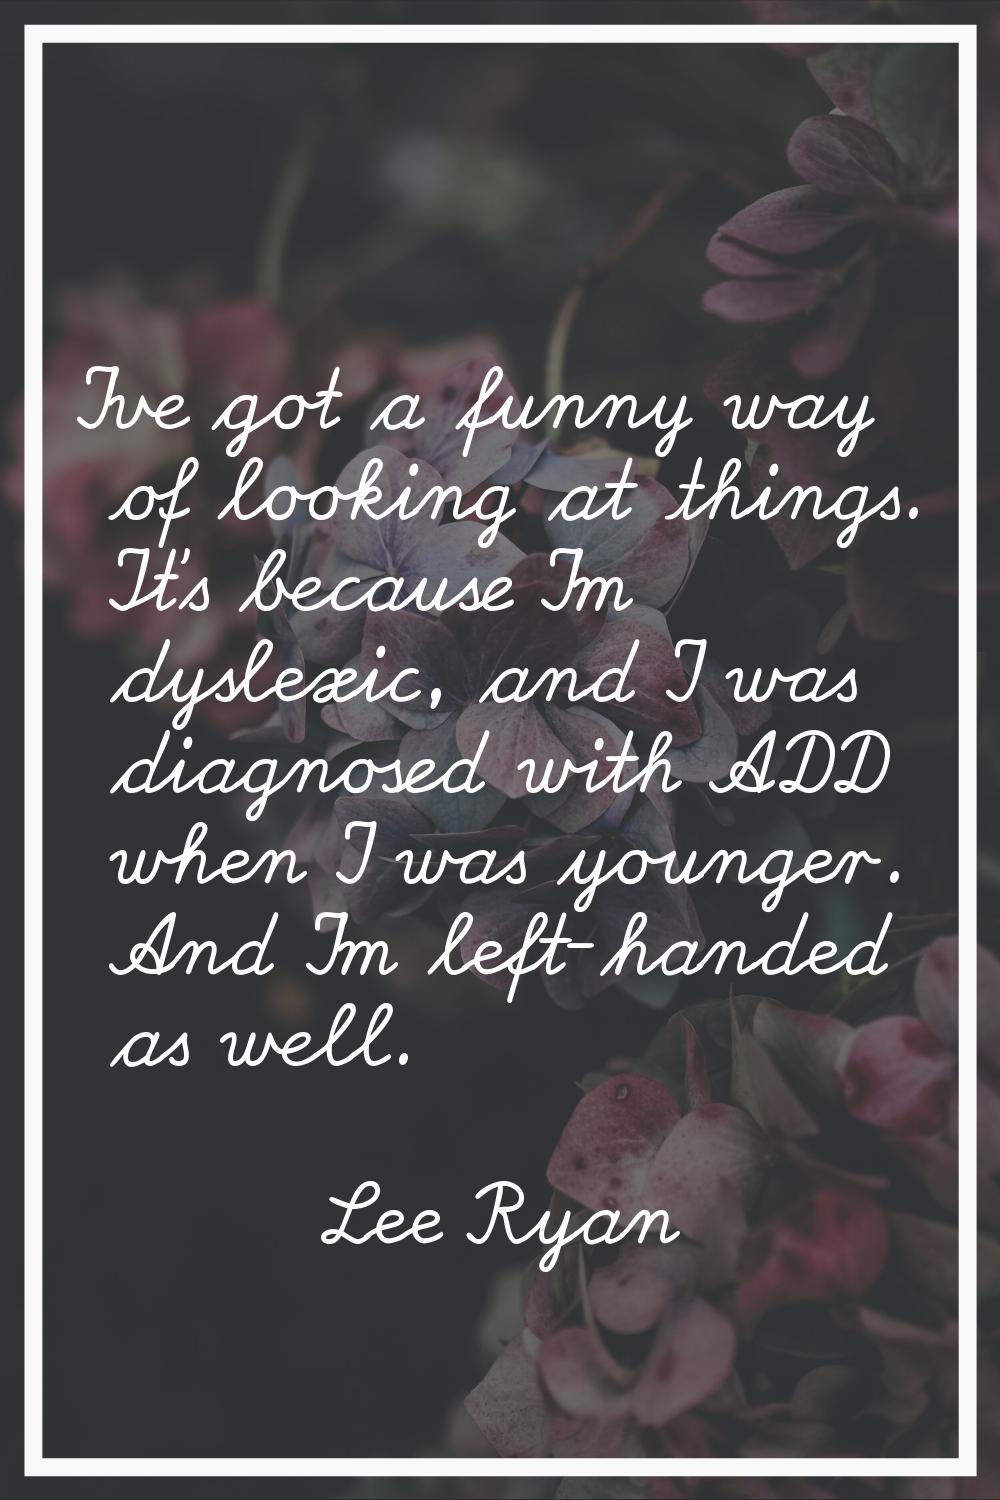 I've got a funny way of looking at things. It's because I'm dyslexic, and I was diagnosed with ADD 